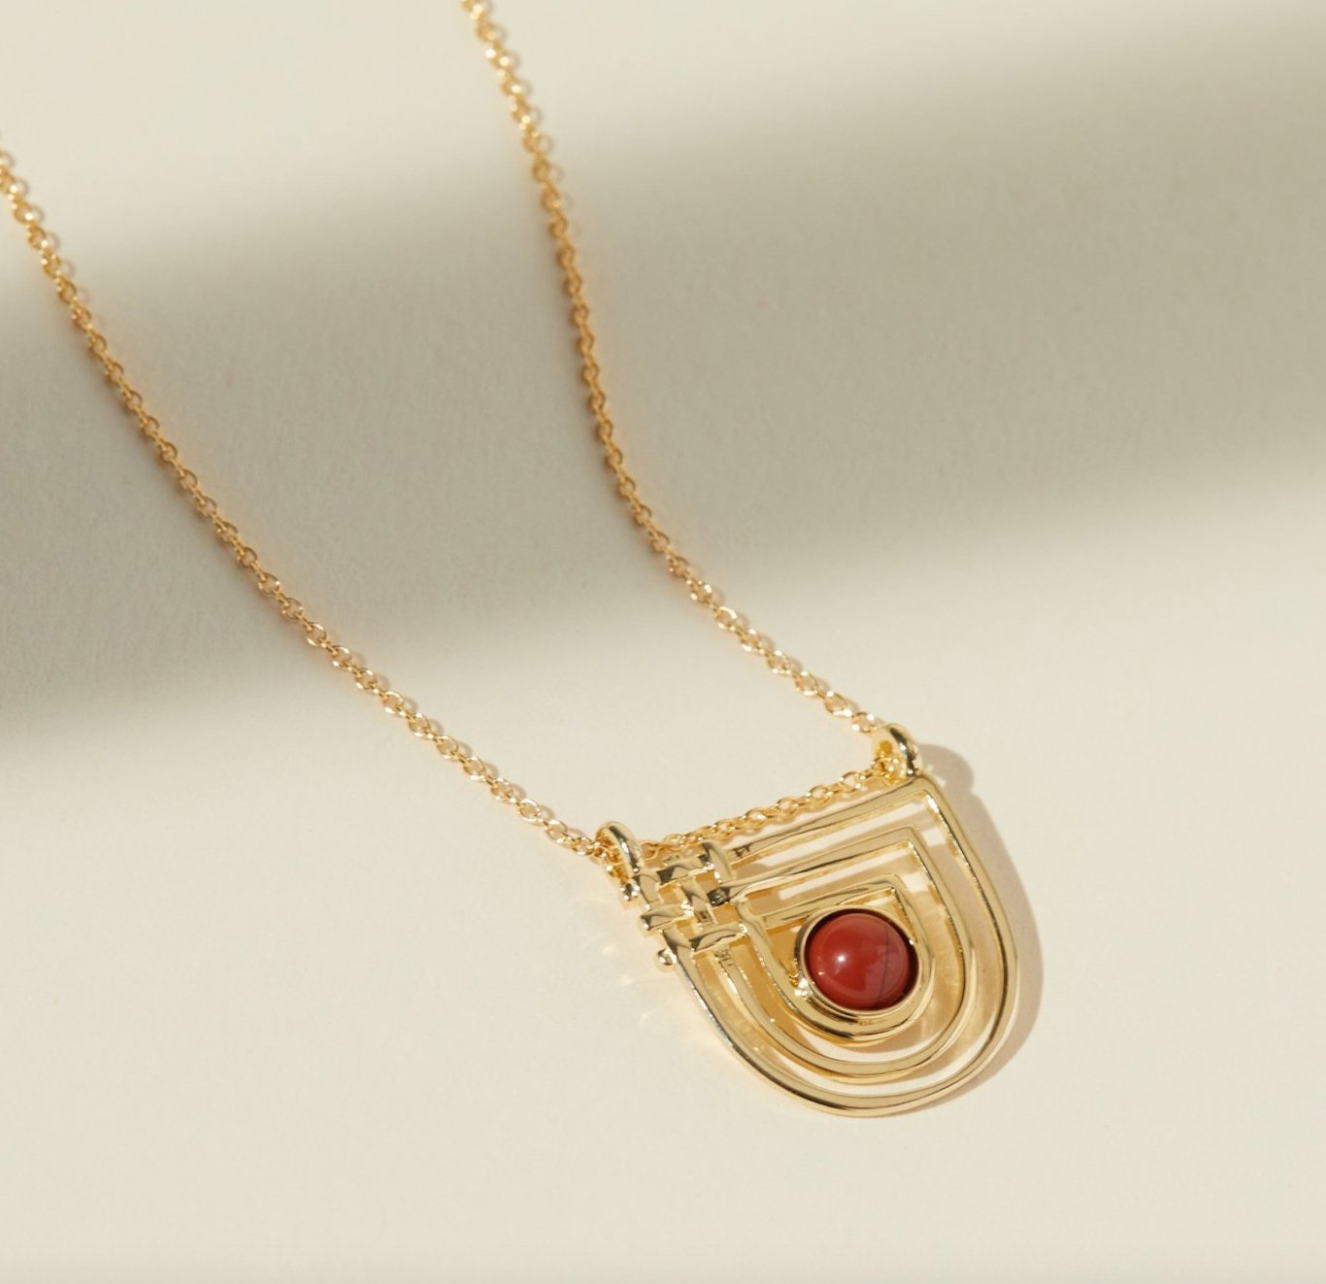 curved, crosshatched pendant necklace with a red jasper center stone on a beige background